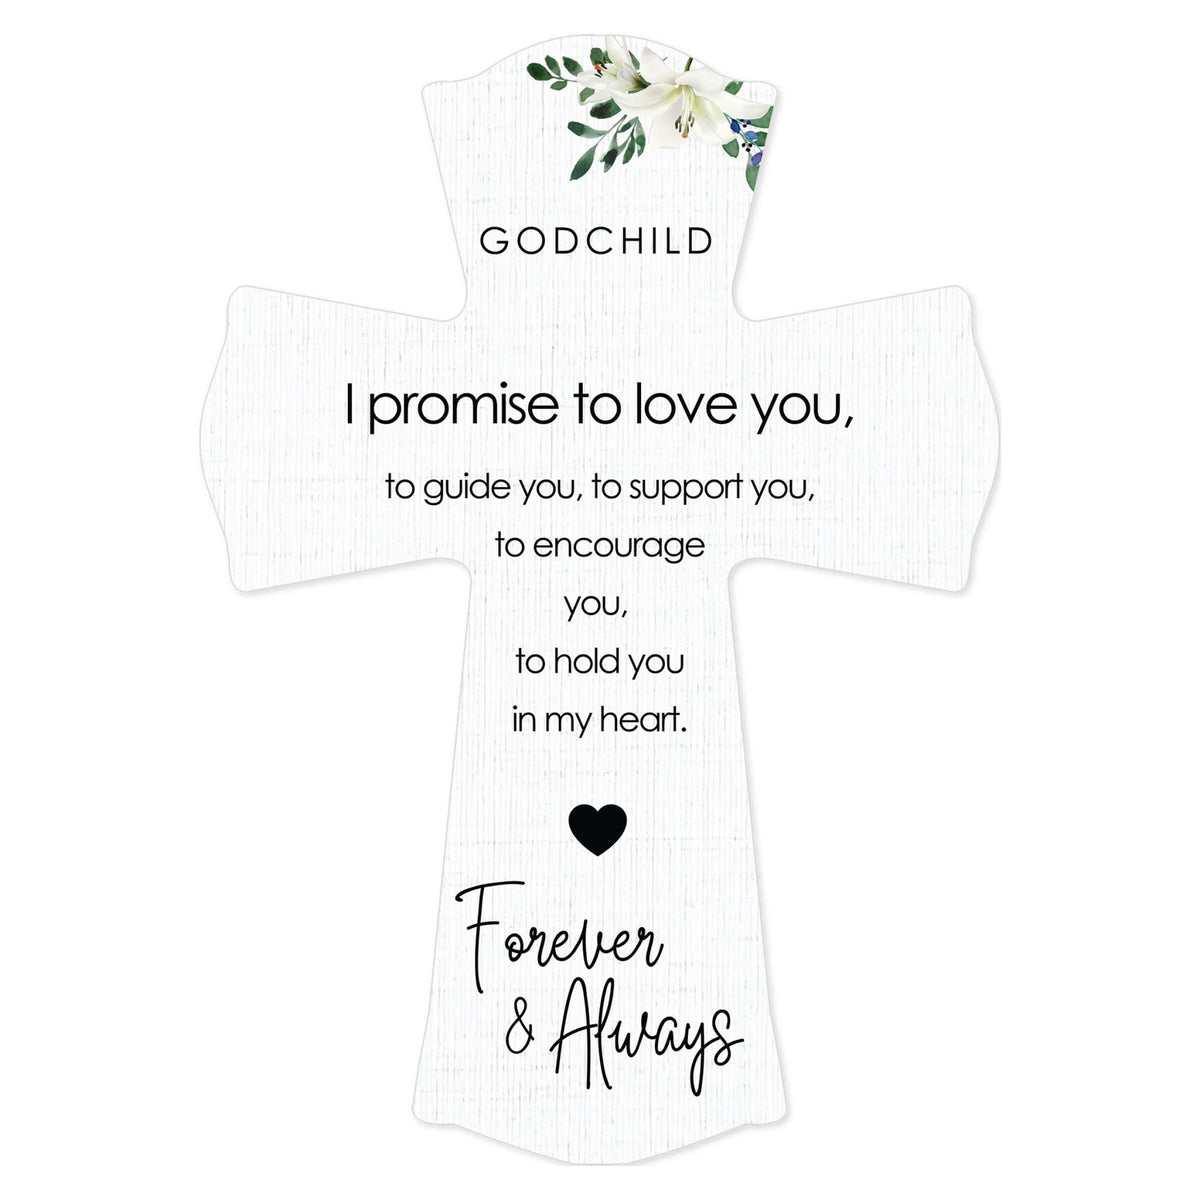 Lifesong Milestones Wooden Wall Cross for Godchild - I Promise To Love You - LifeSong Milestones